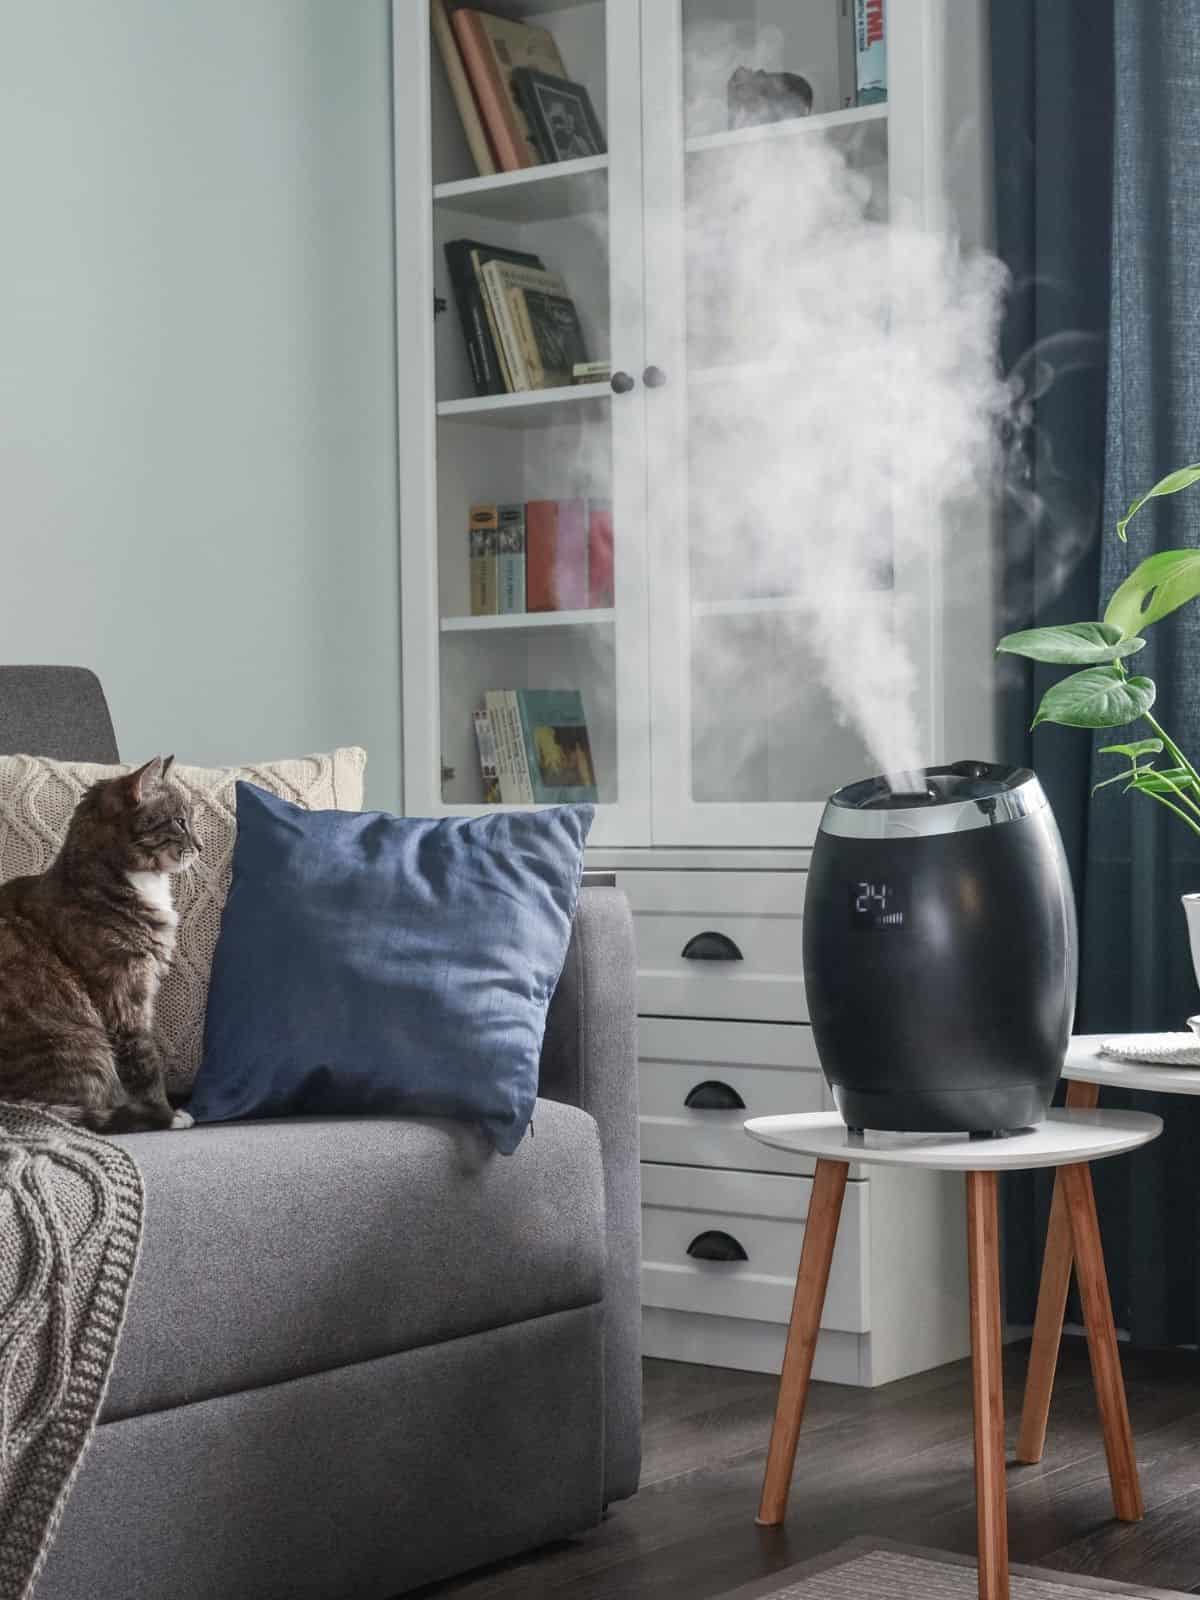 A diffuser diffusing essential oils in the living room.